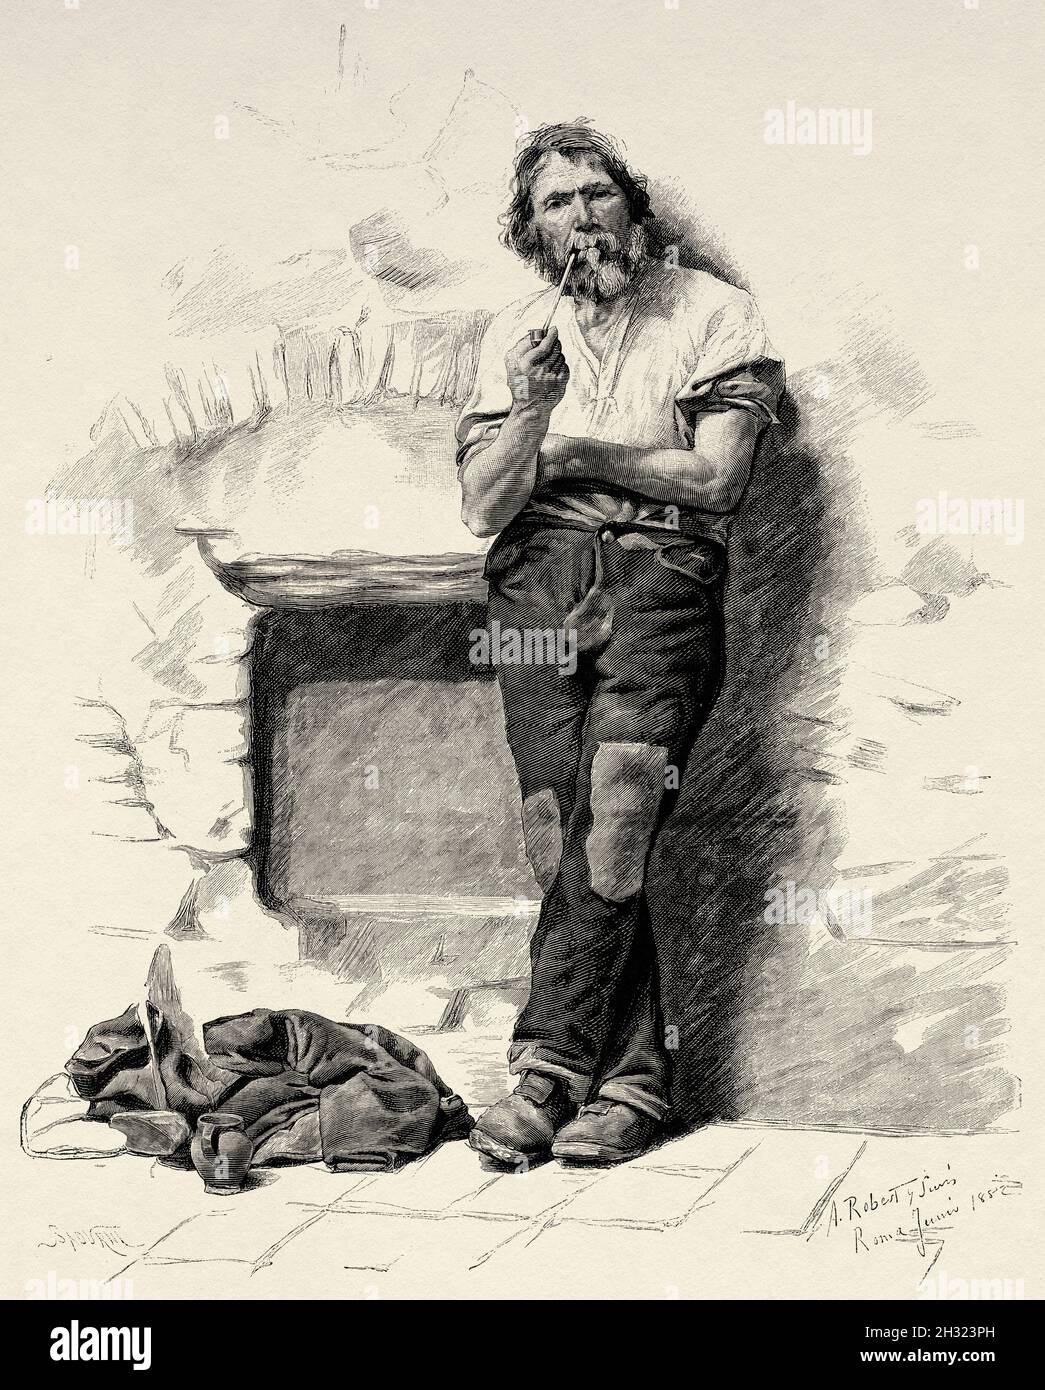 Studio portrait of a man smoking a pipe, painting by Agustí Robert i Suris (1860-1913) was a spanish painter. Old 19th century engraved illustration from La Ilustración Artística 1882 Stock Photo